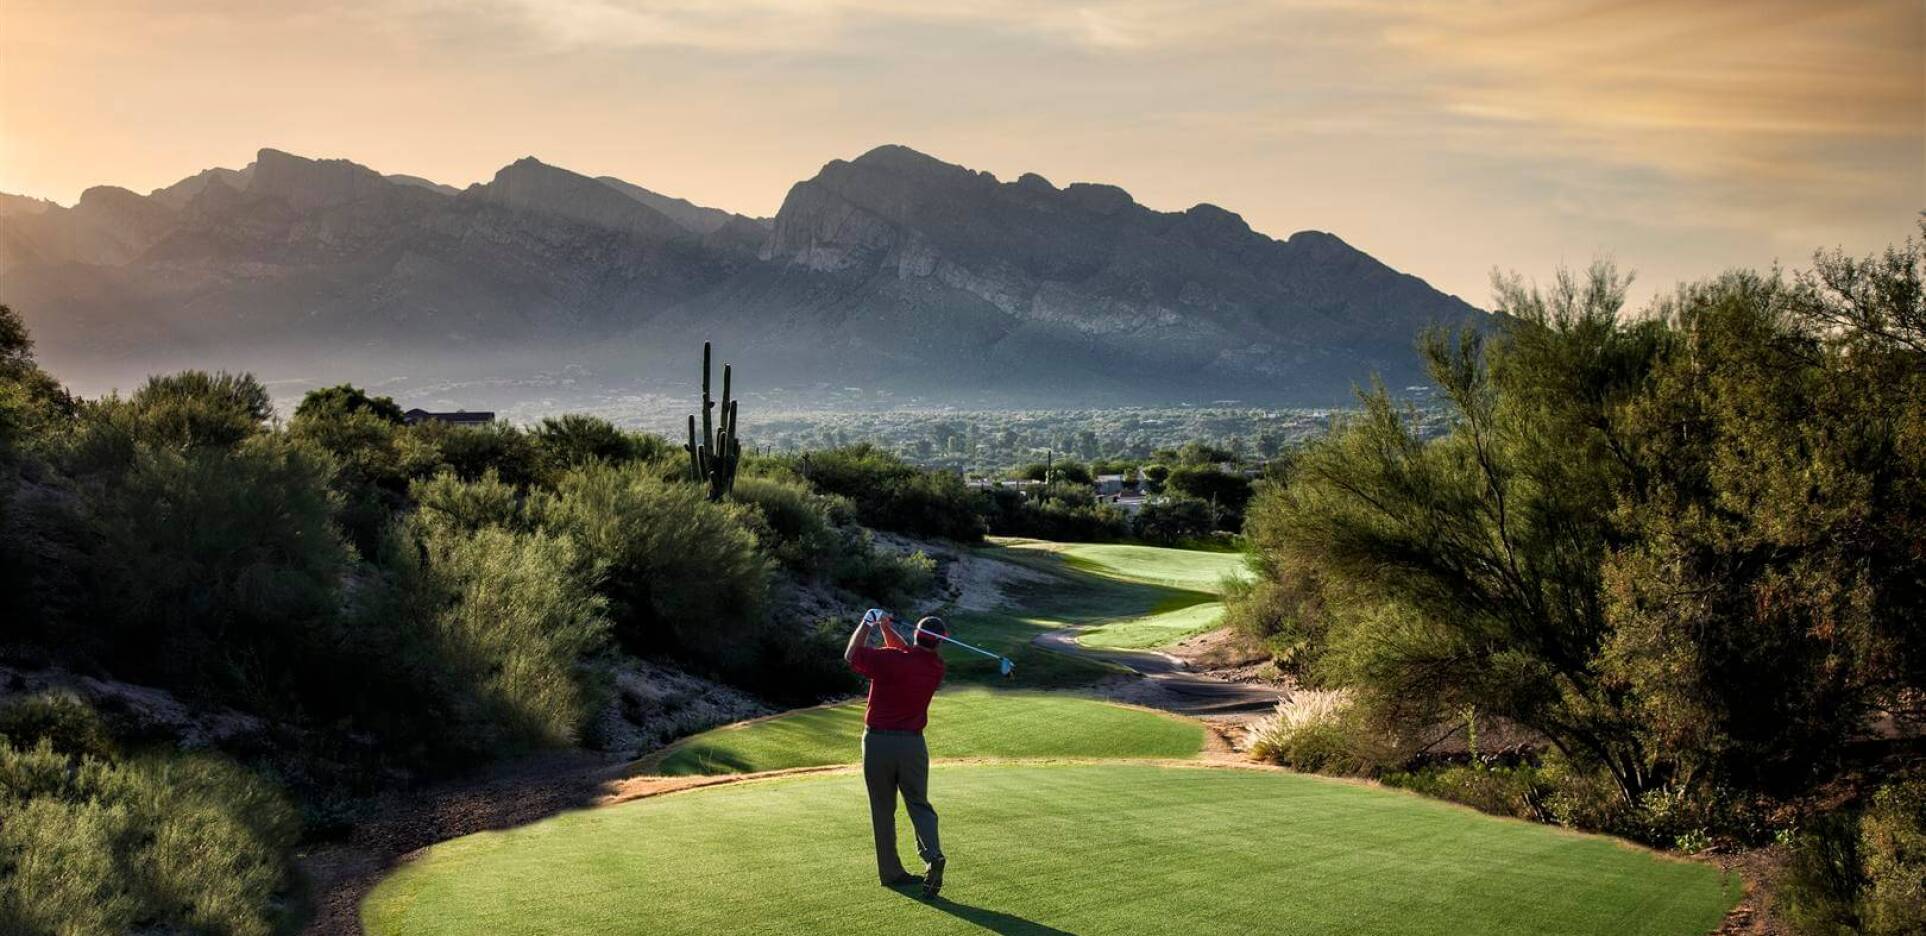 Golfing Experiences Await at Oro Valley Golf: Explore Now!